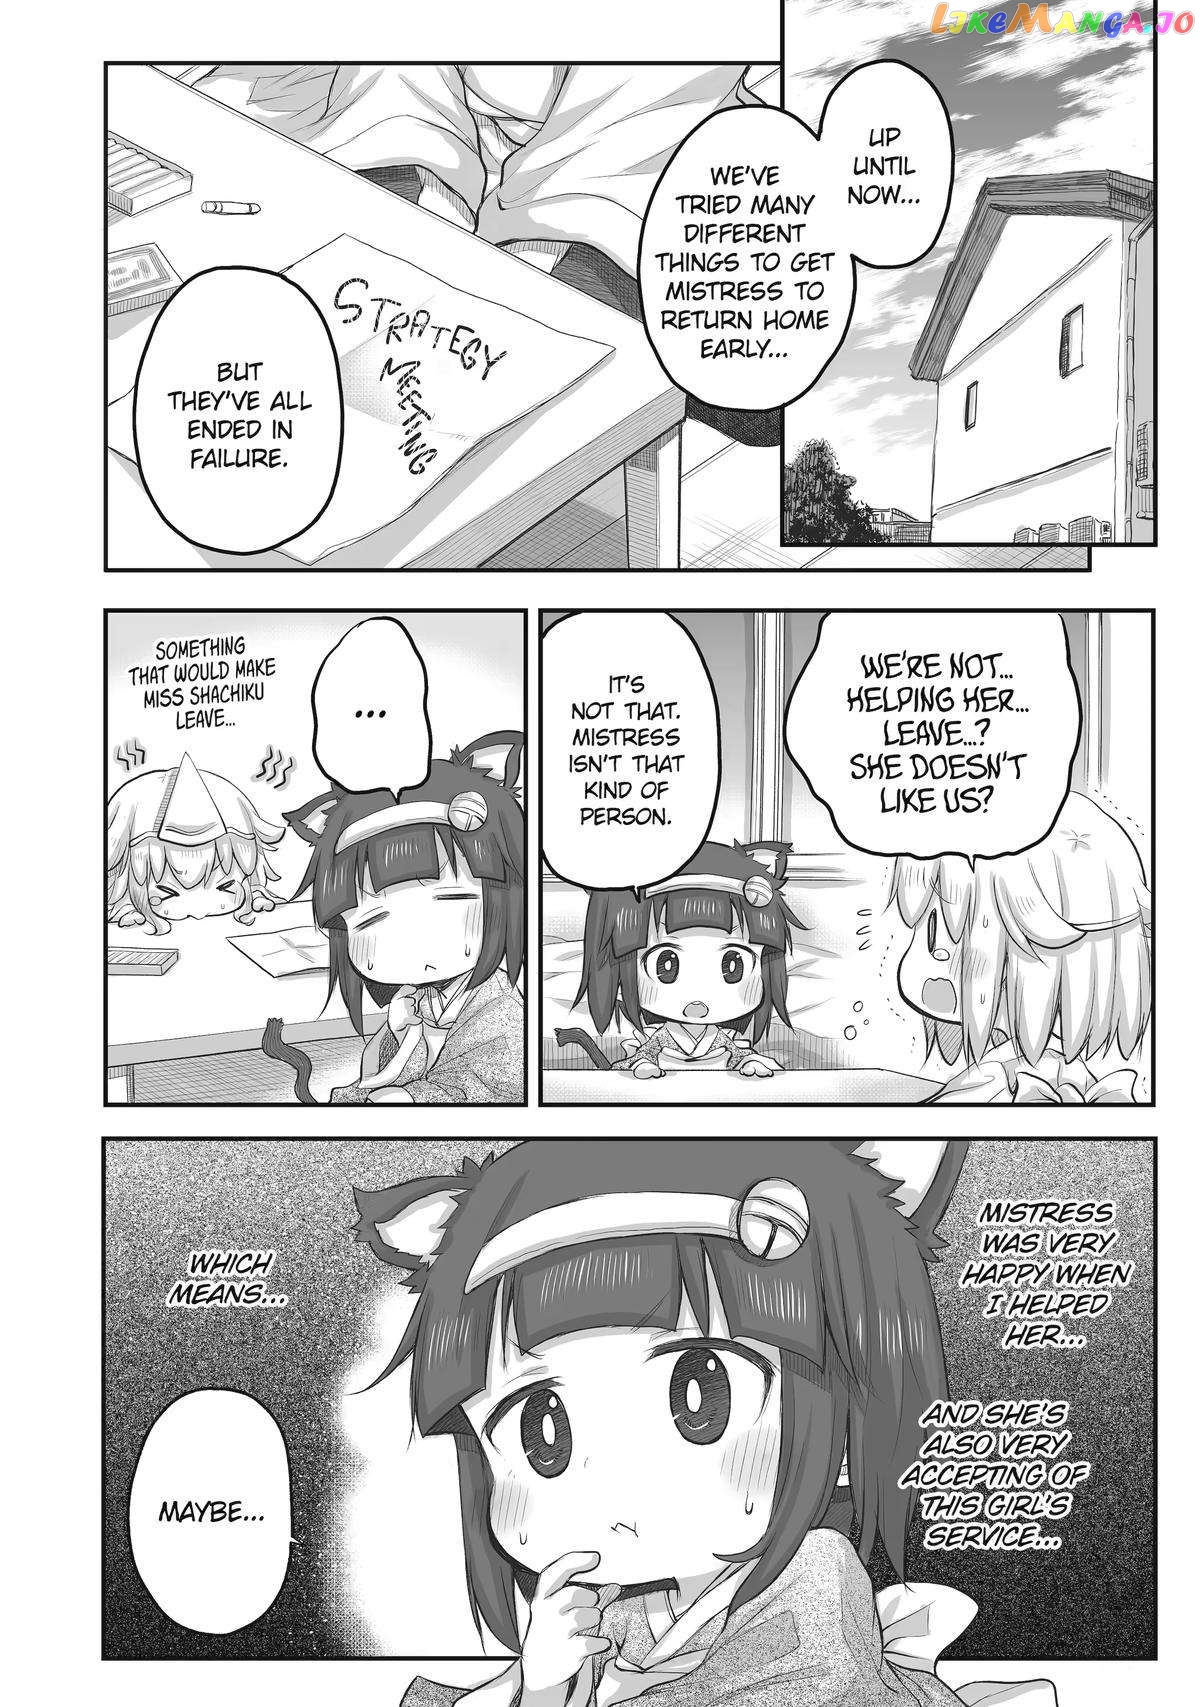 Ms. Corporate Slave Wants to be Healed by a Loli Spirit - chapter 37 - #4